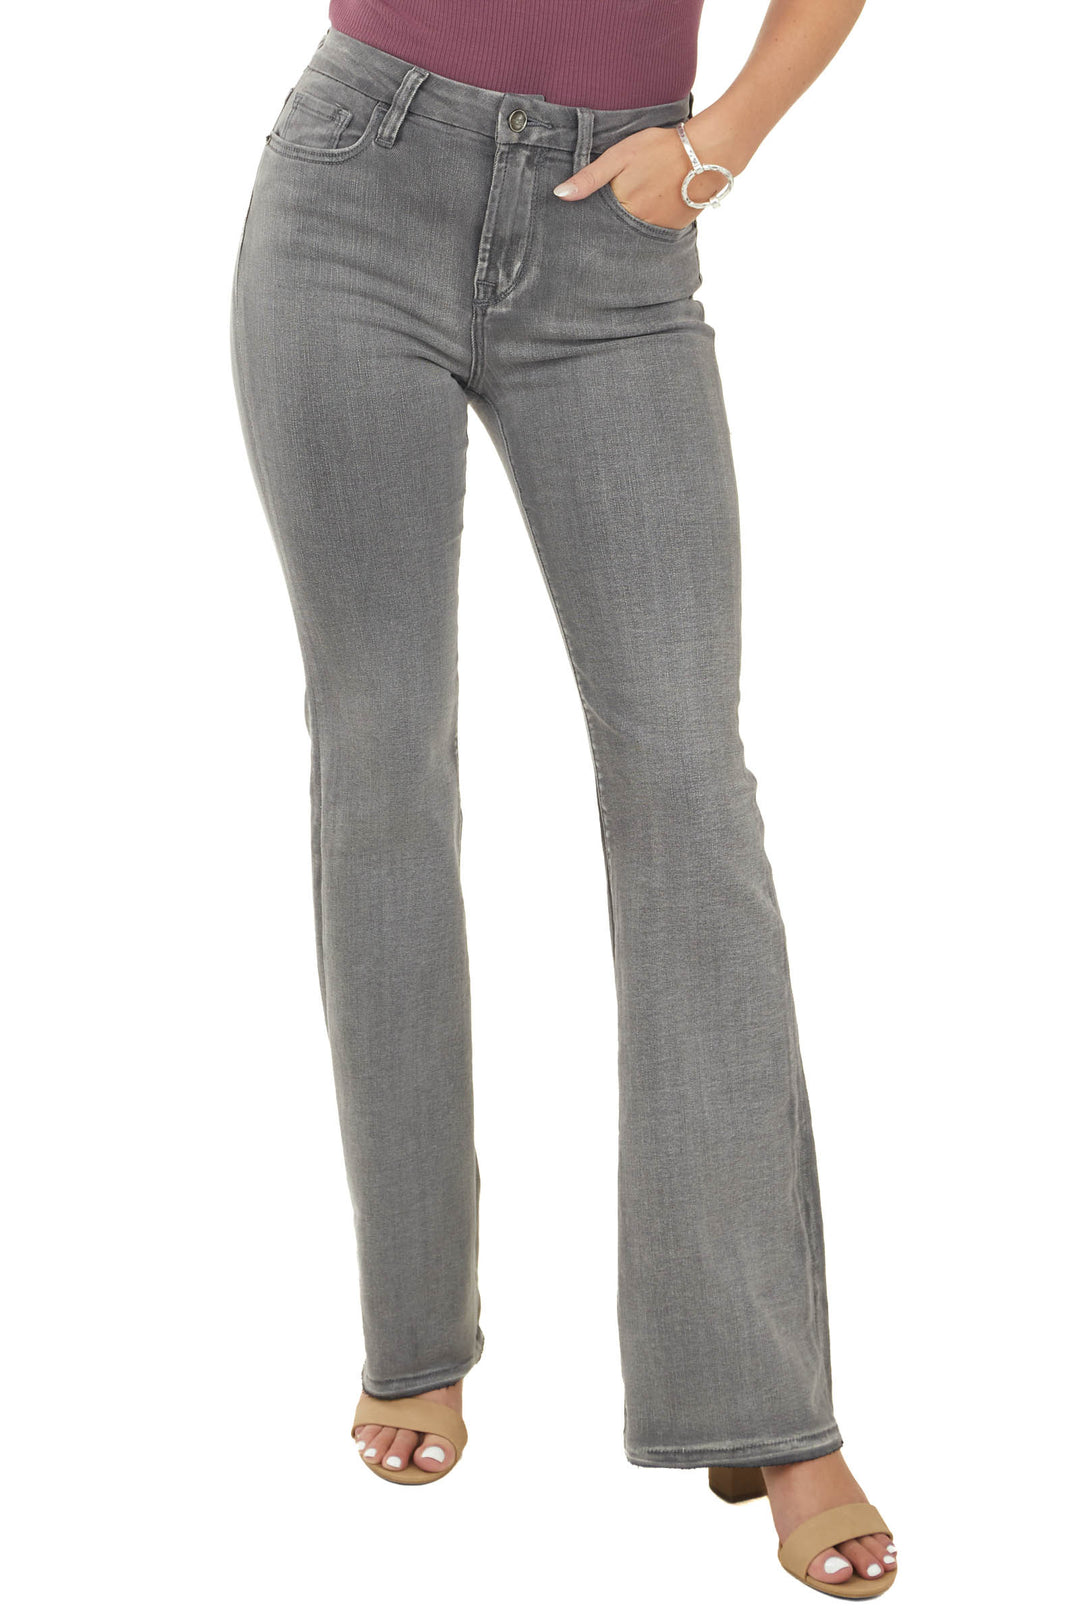 I&M Stone Grey Washed High Rise Flare Jeans & Lime Lush